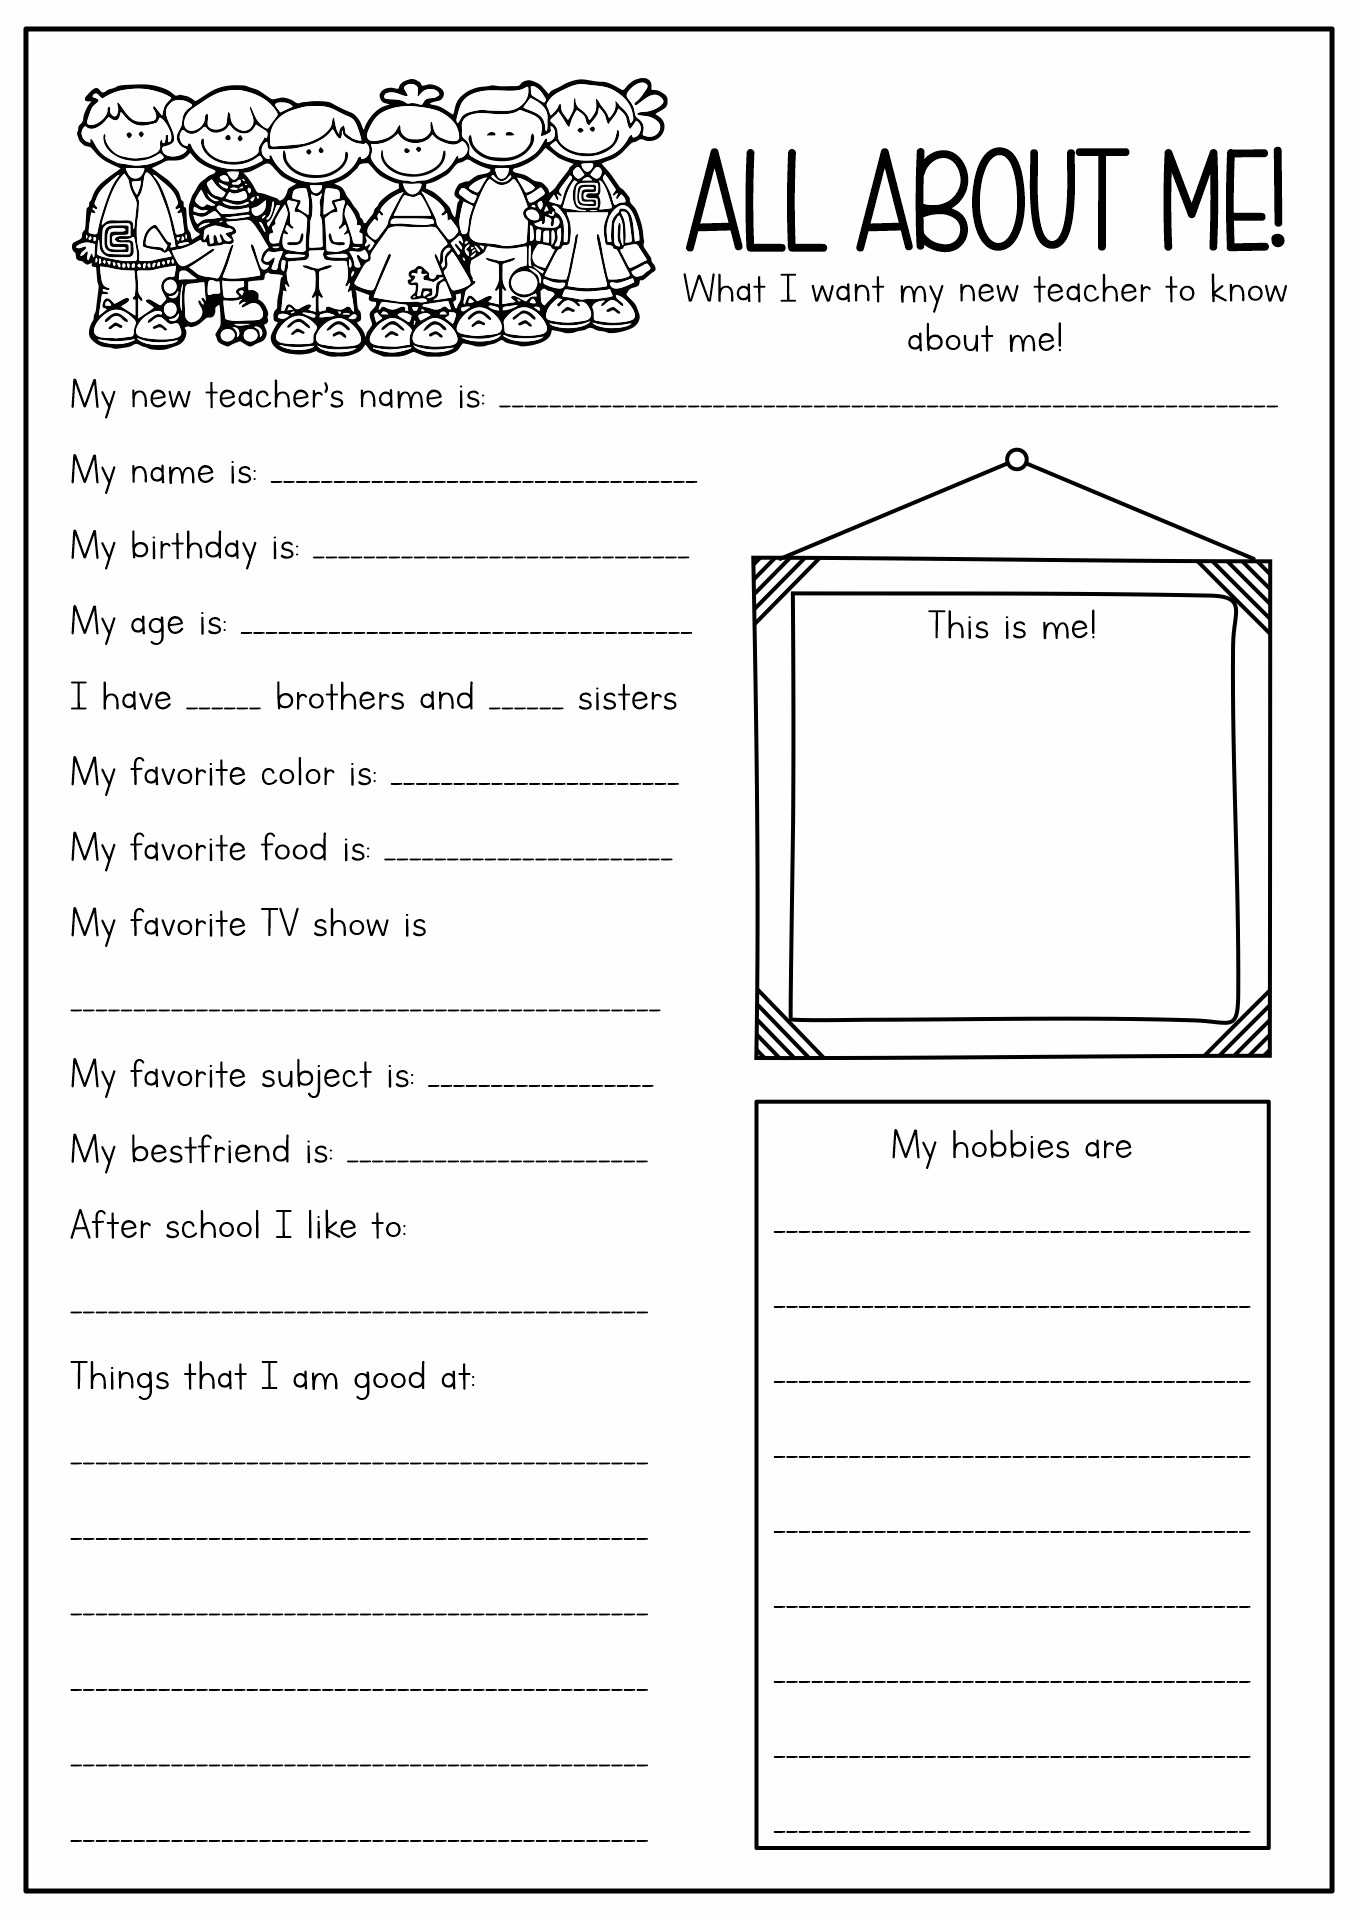 14-all-about-me-printable-worksheet-for-adults-free-pdf-at-worksheeto